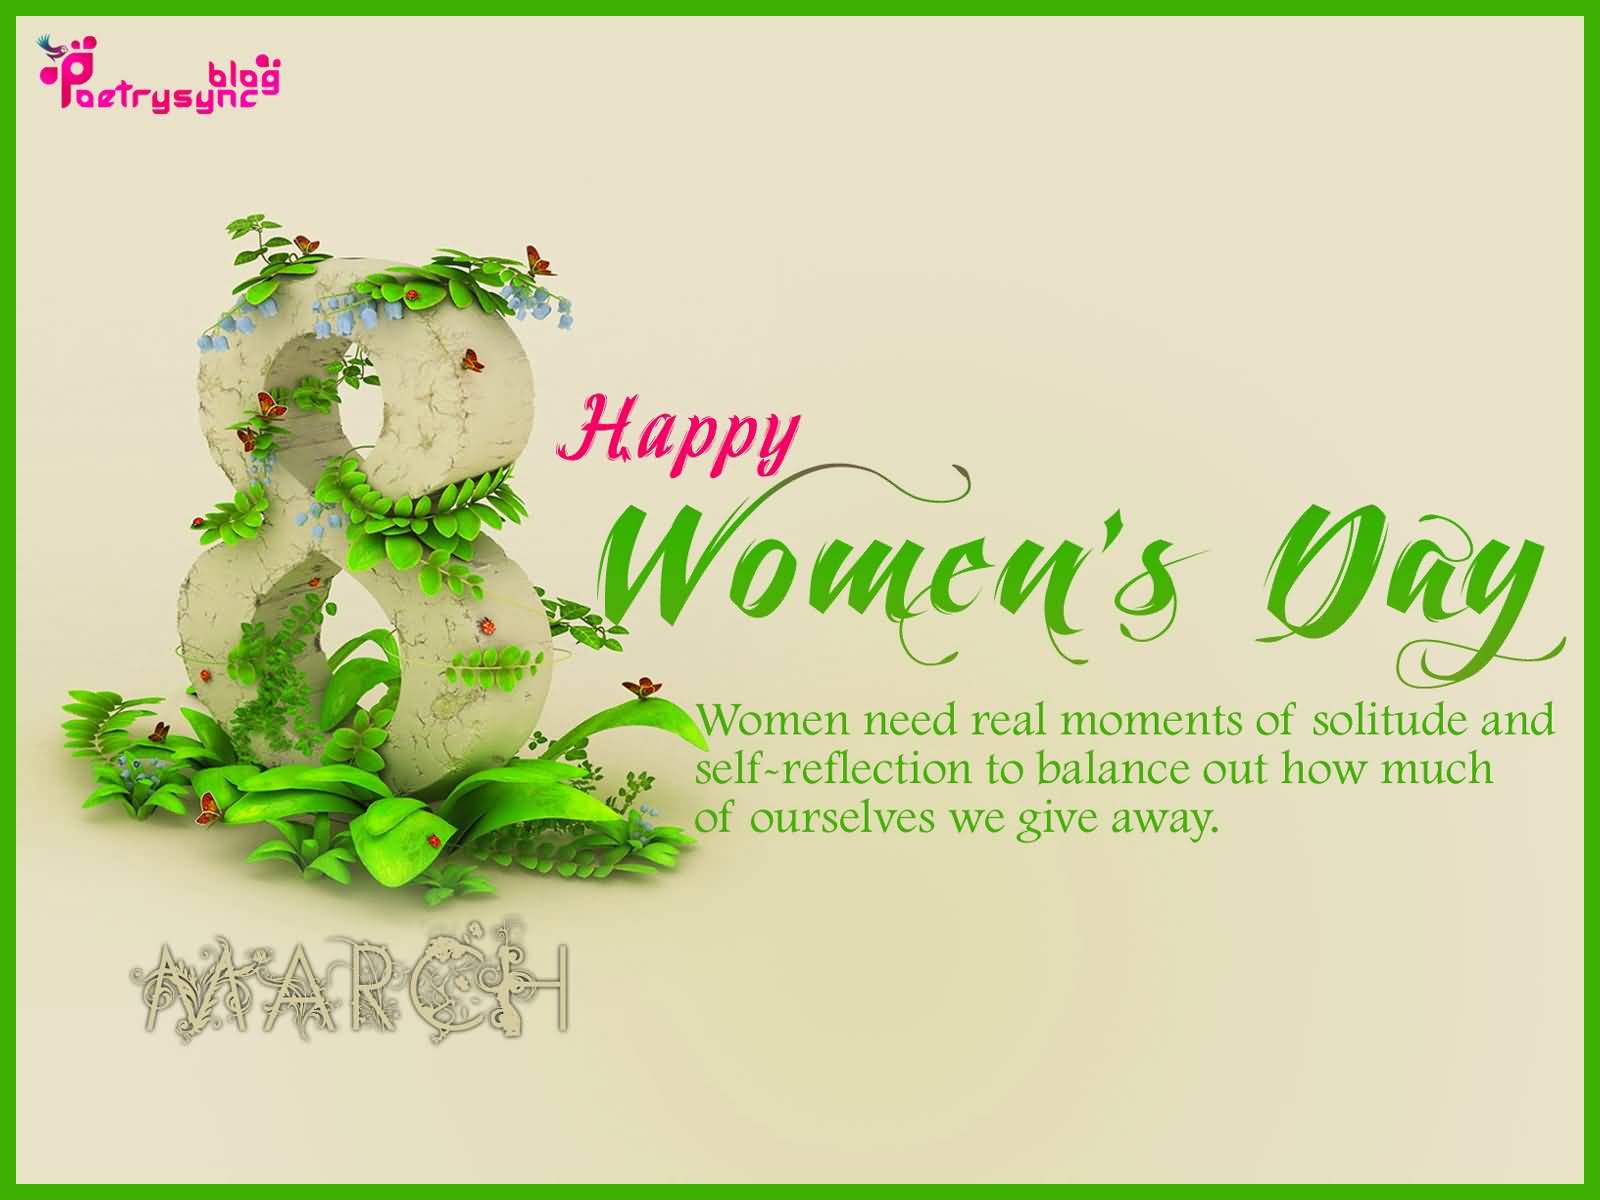 Happy Women's Day 8 March Card